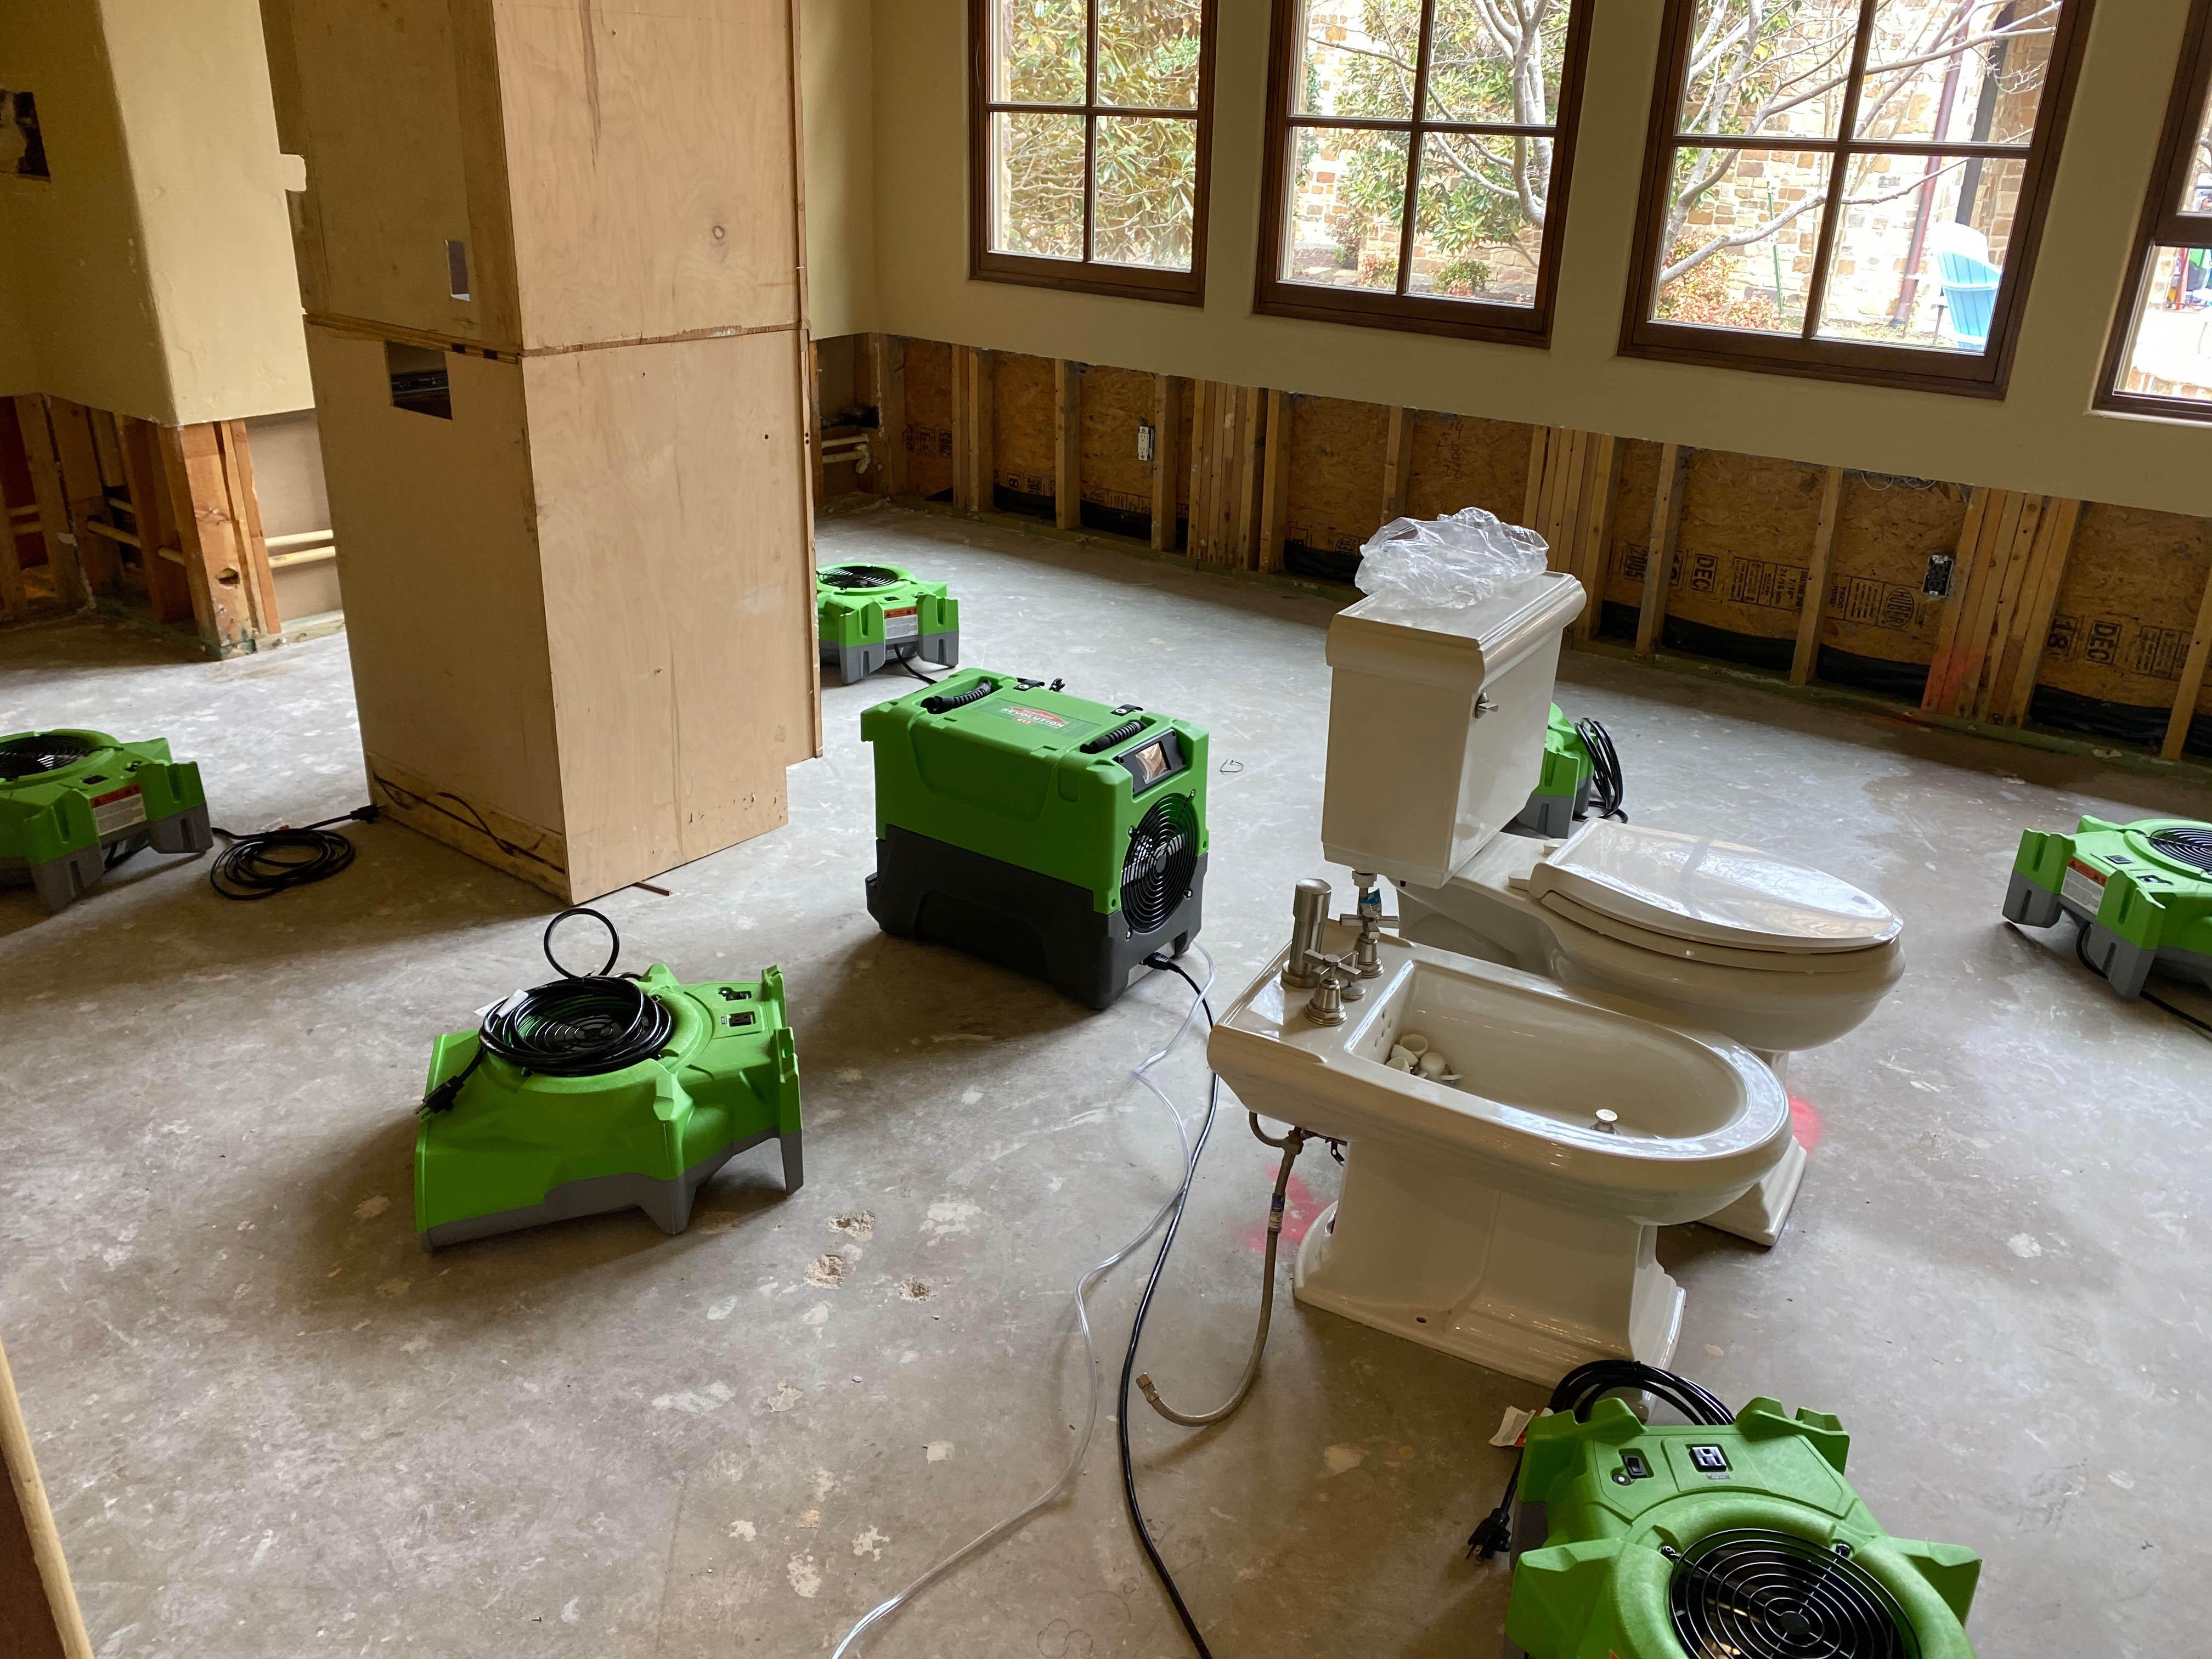 SERVPRO of Park Ridge, North Rosemont and South Des Plaines is the premier choice to call after a water loss. Our team of IICRC certified technicians can handle any large or small loss.  Contact us at anytime.